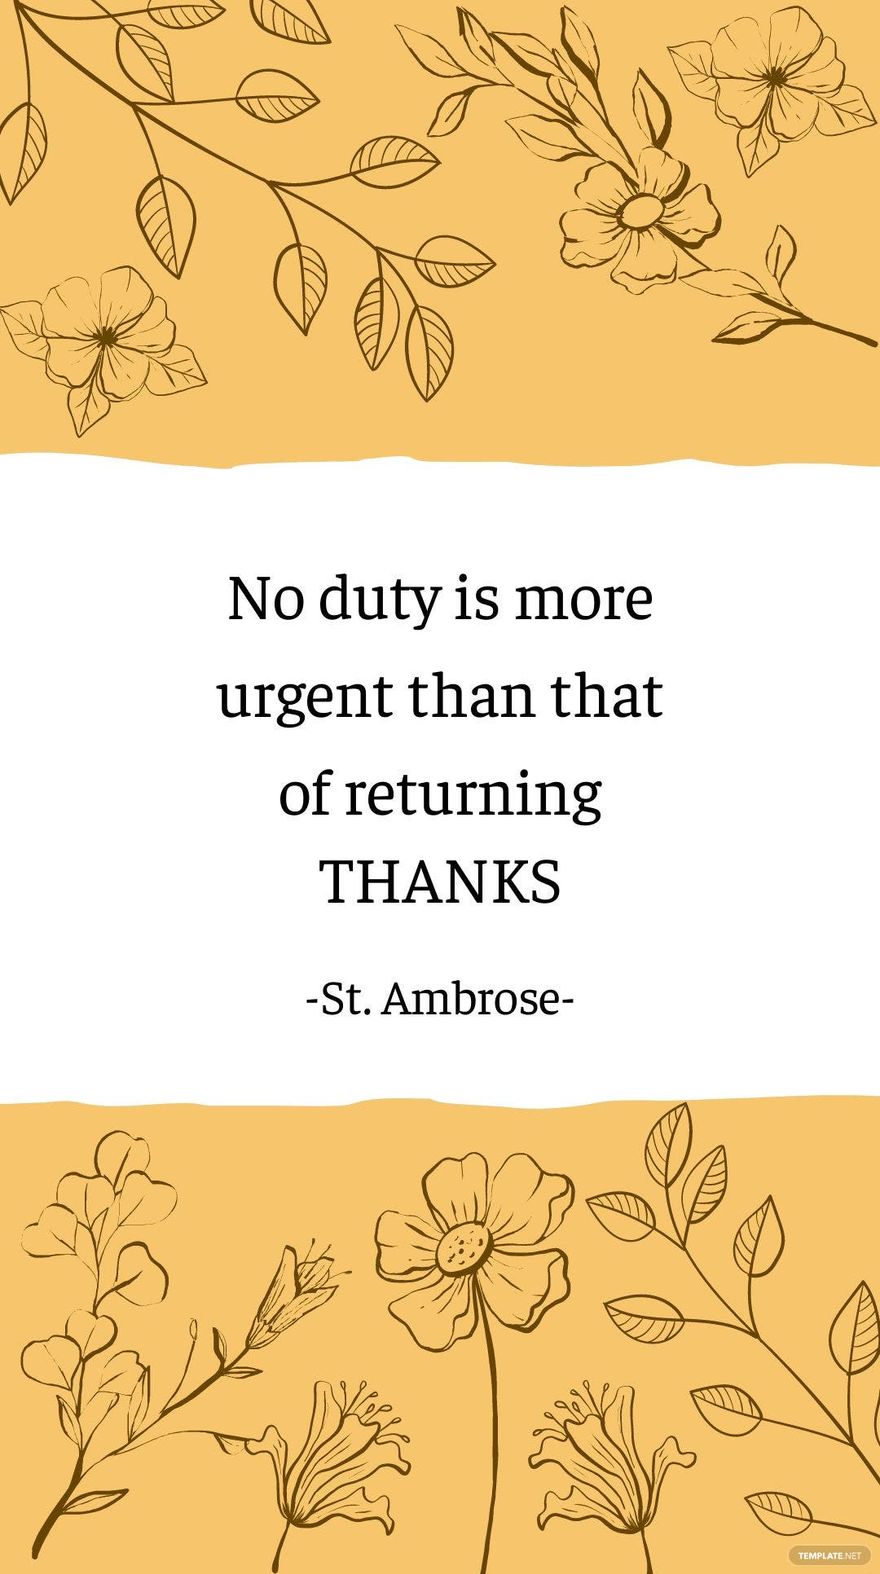 Free St. Ambrose - No duty is more urgent than that of returning thanks in JPG